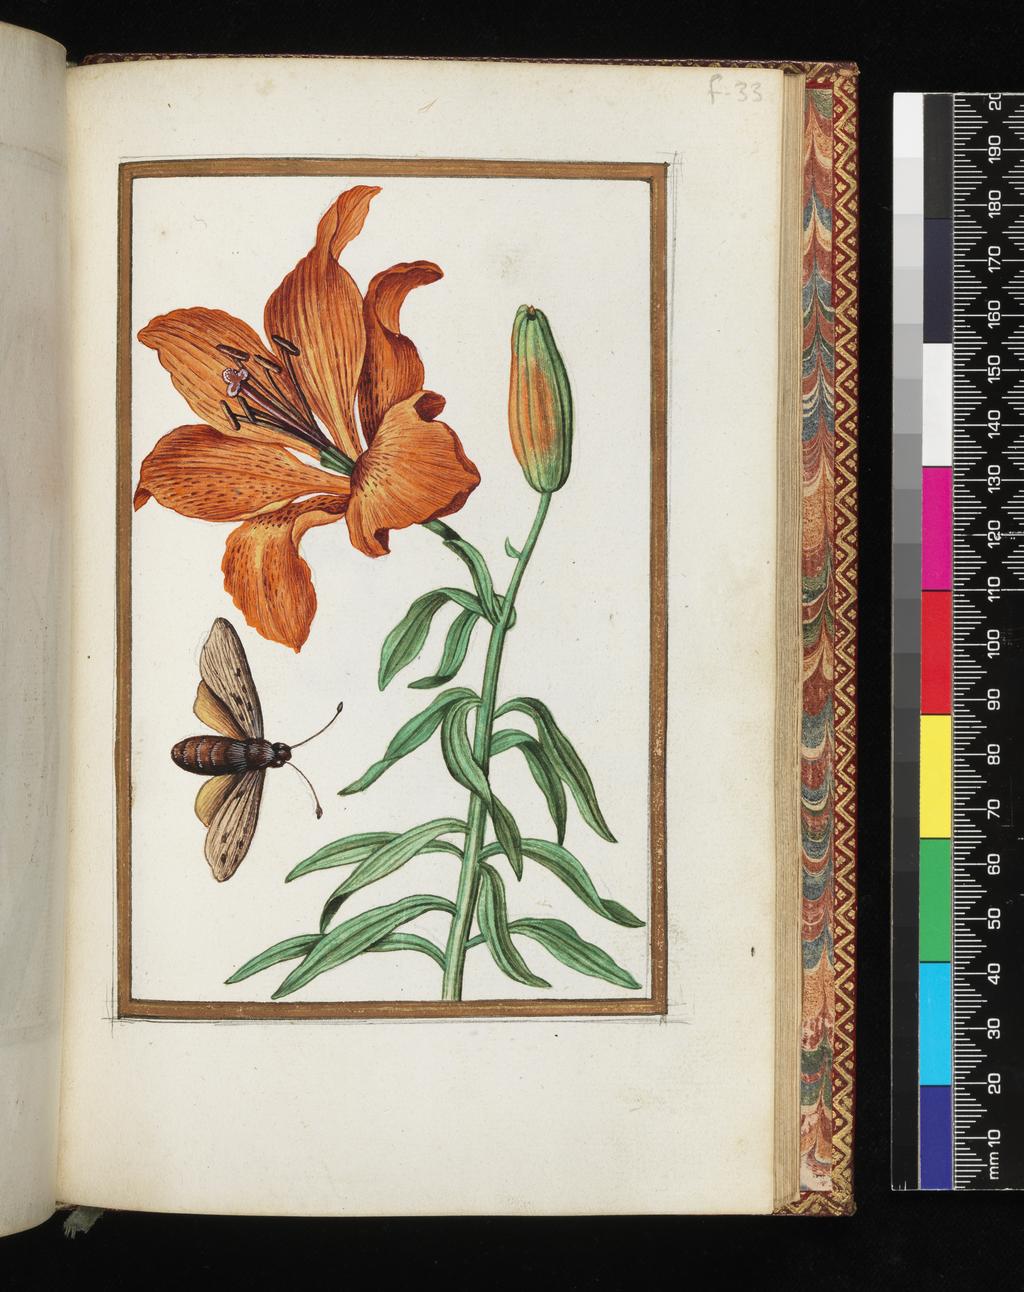 An image of Album. Lilium Bulbiferum Orange Lily with an insect. Pinet, Antoine du (French, op. c. 1584). Drawing, height, sheet size, 204 mm, width, sheet size, 139 mm. Each of the drawings is framed by a border of gold paint of varying size according to the depth of the painted area. The drawings on white laid paper, watermarked with a bunch of grapes are bound into an album with a contemporary gold-tooled limp vellum cover bearing the arms, recto and verso of Louise of Lorraine (1553-1601). This, in turn, is bound into an eighteenth century French red morocco gilt binding. The spine is lettered in gold (see 'inscriptions/marks'.) Each of the drawings is framed by a border of gold paint of varying size according to the depth of the painted area.